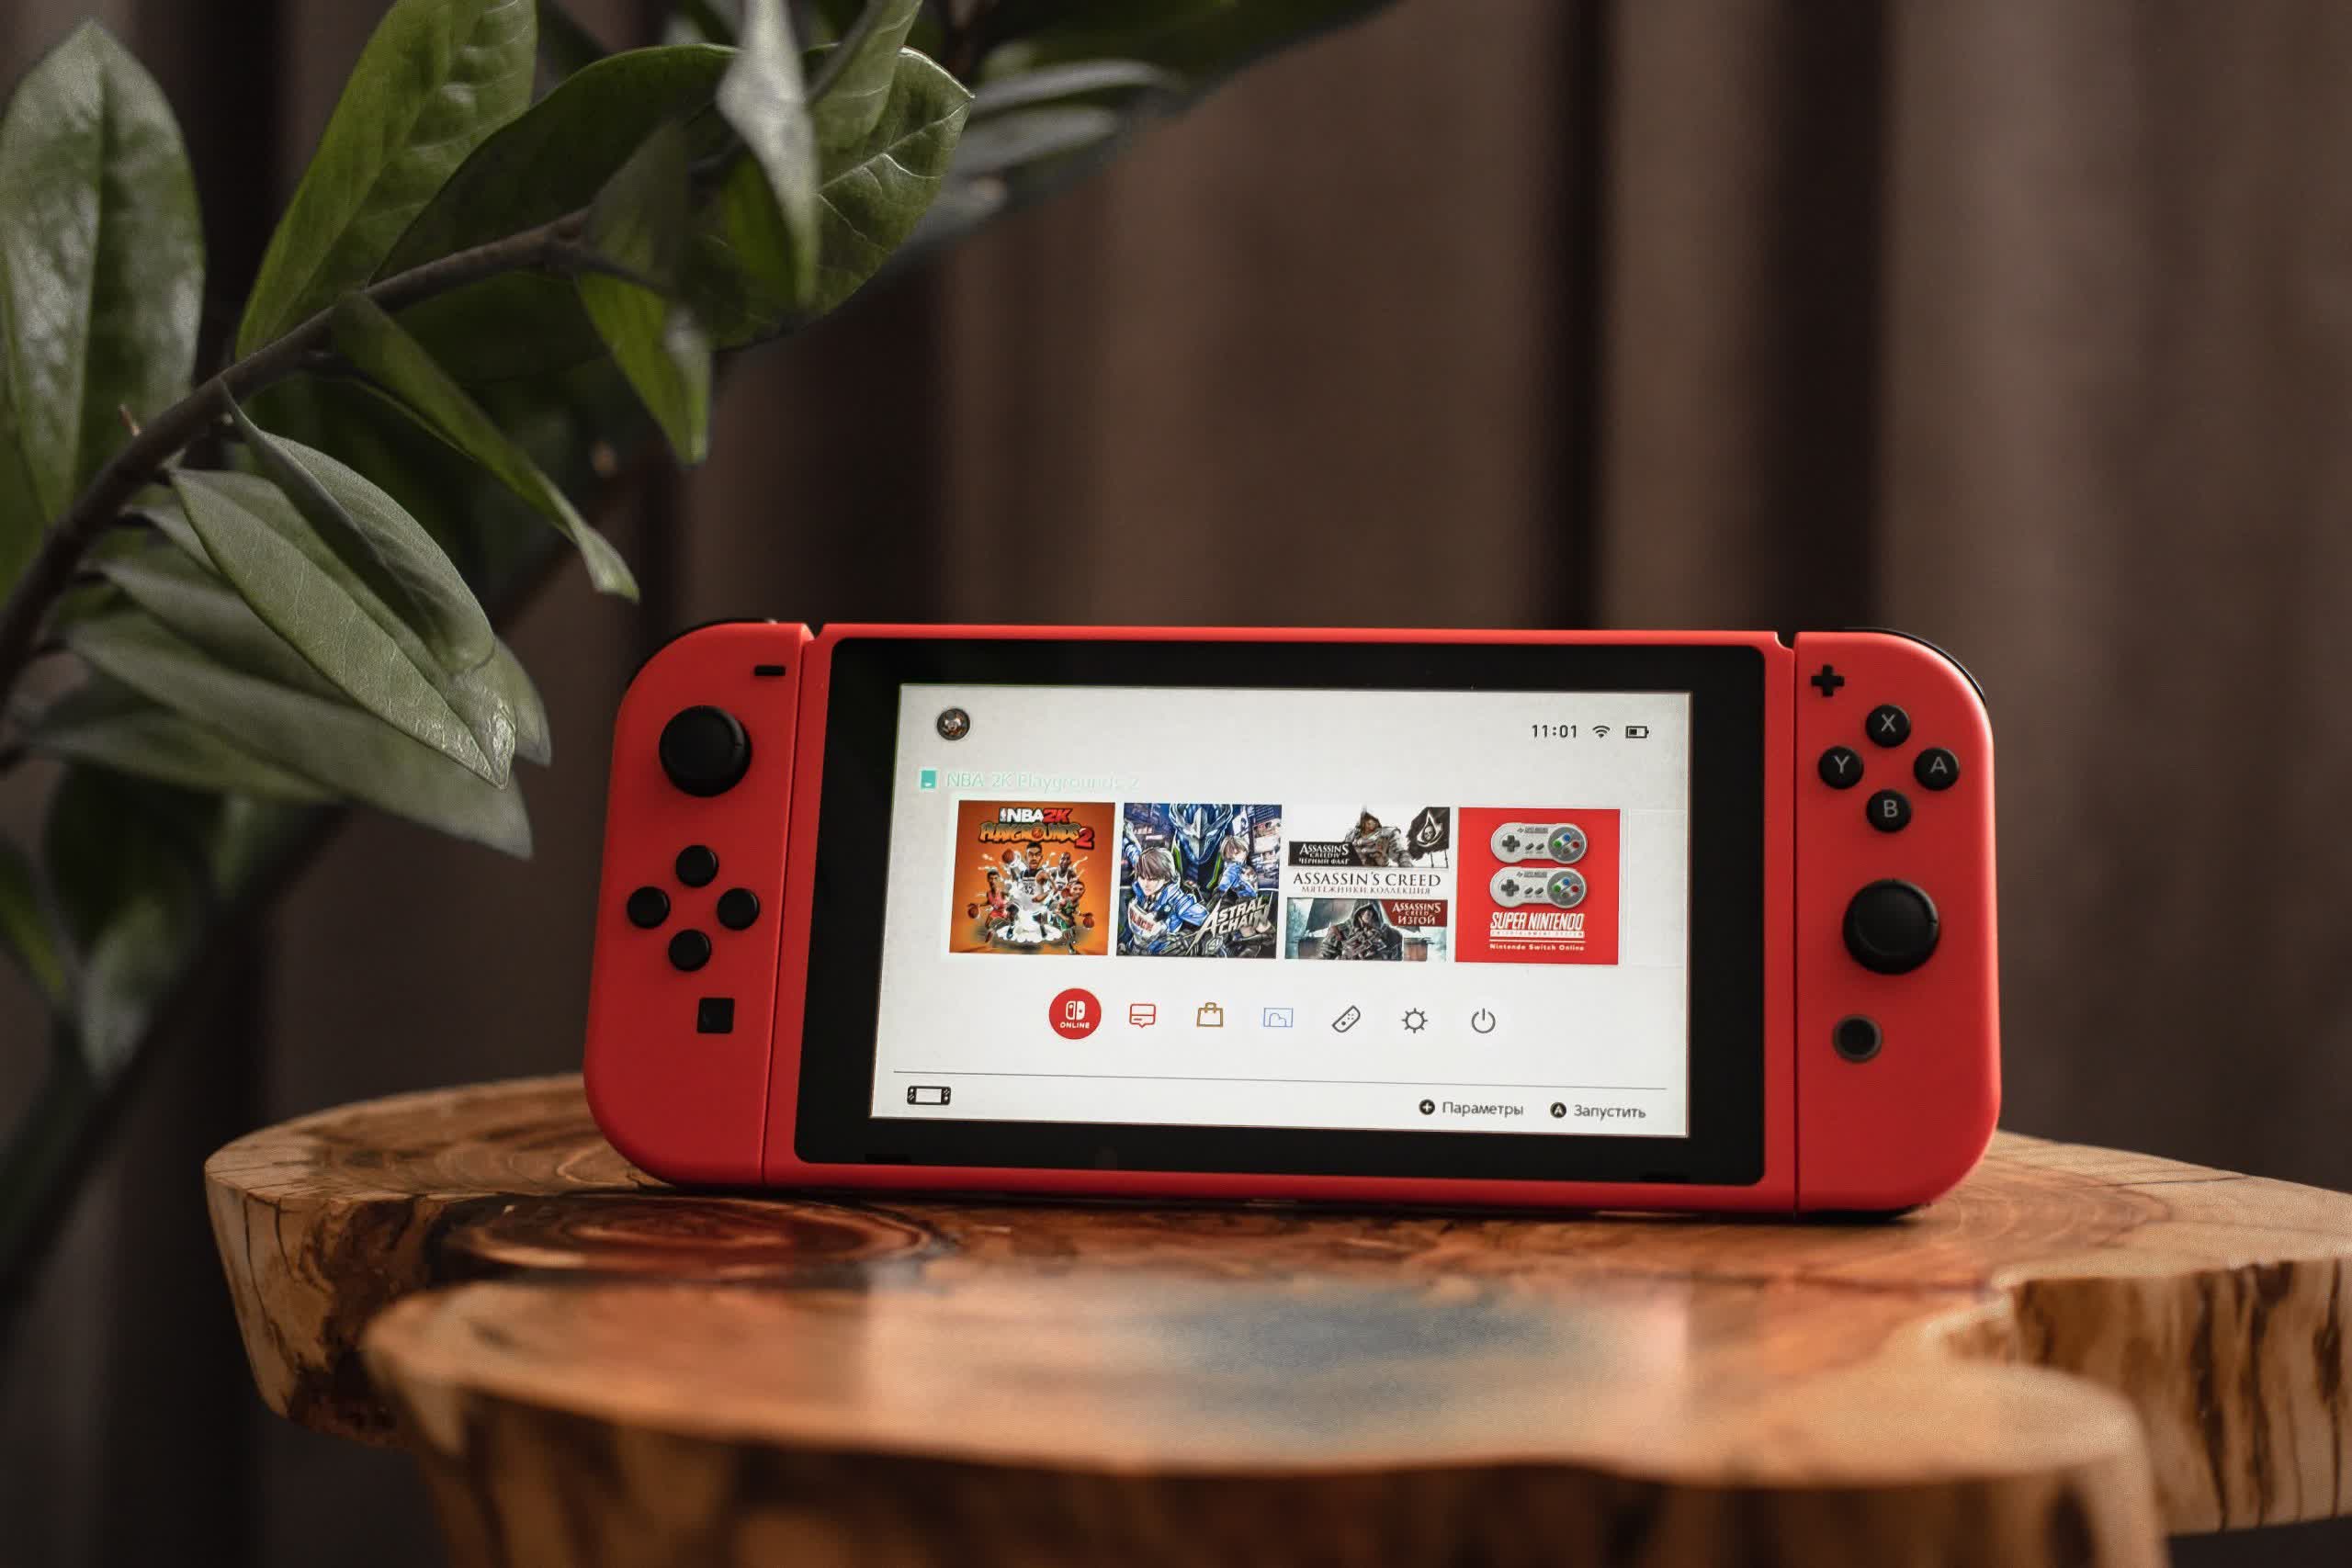 Nintendo Switch sees its first price drop ahead of OLED model but only in EU and UK